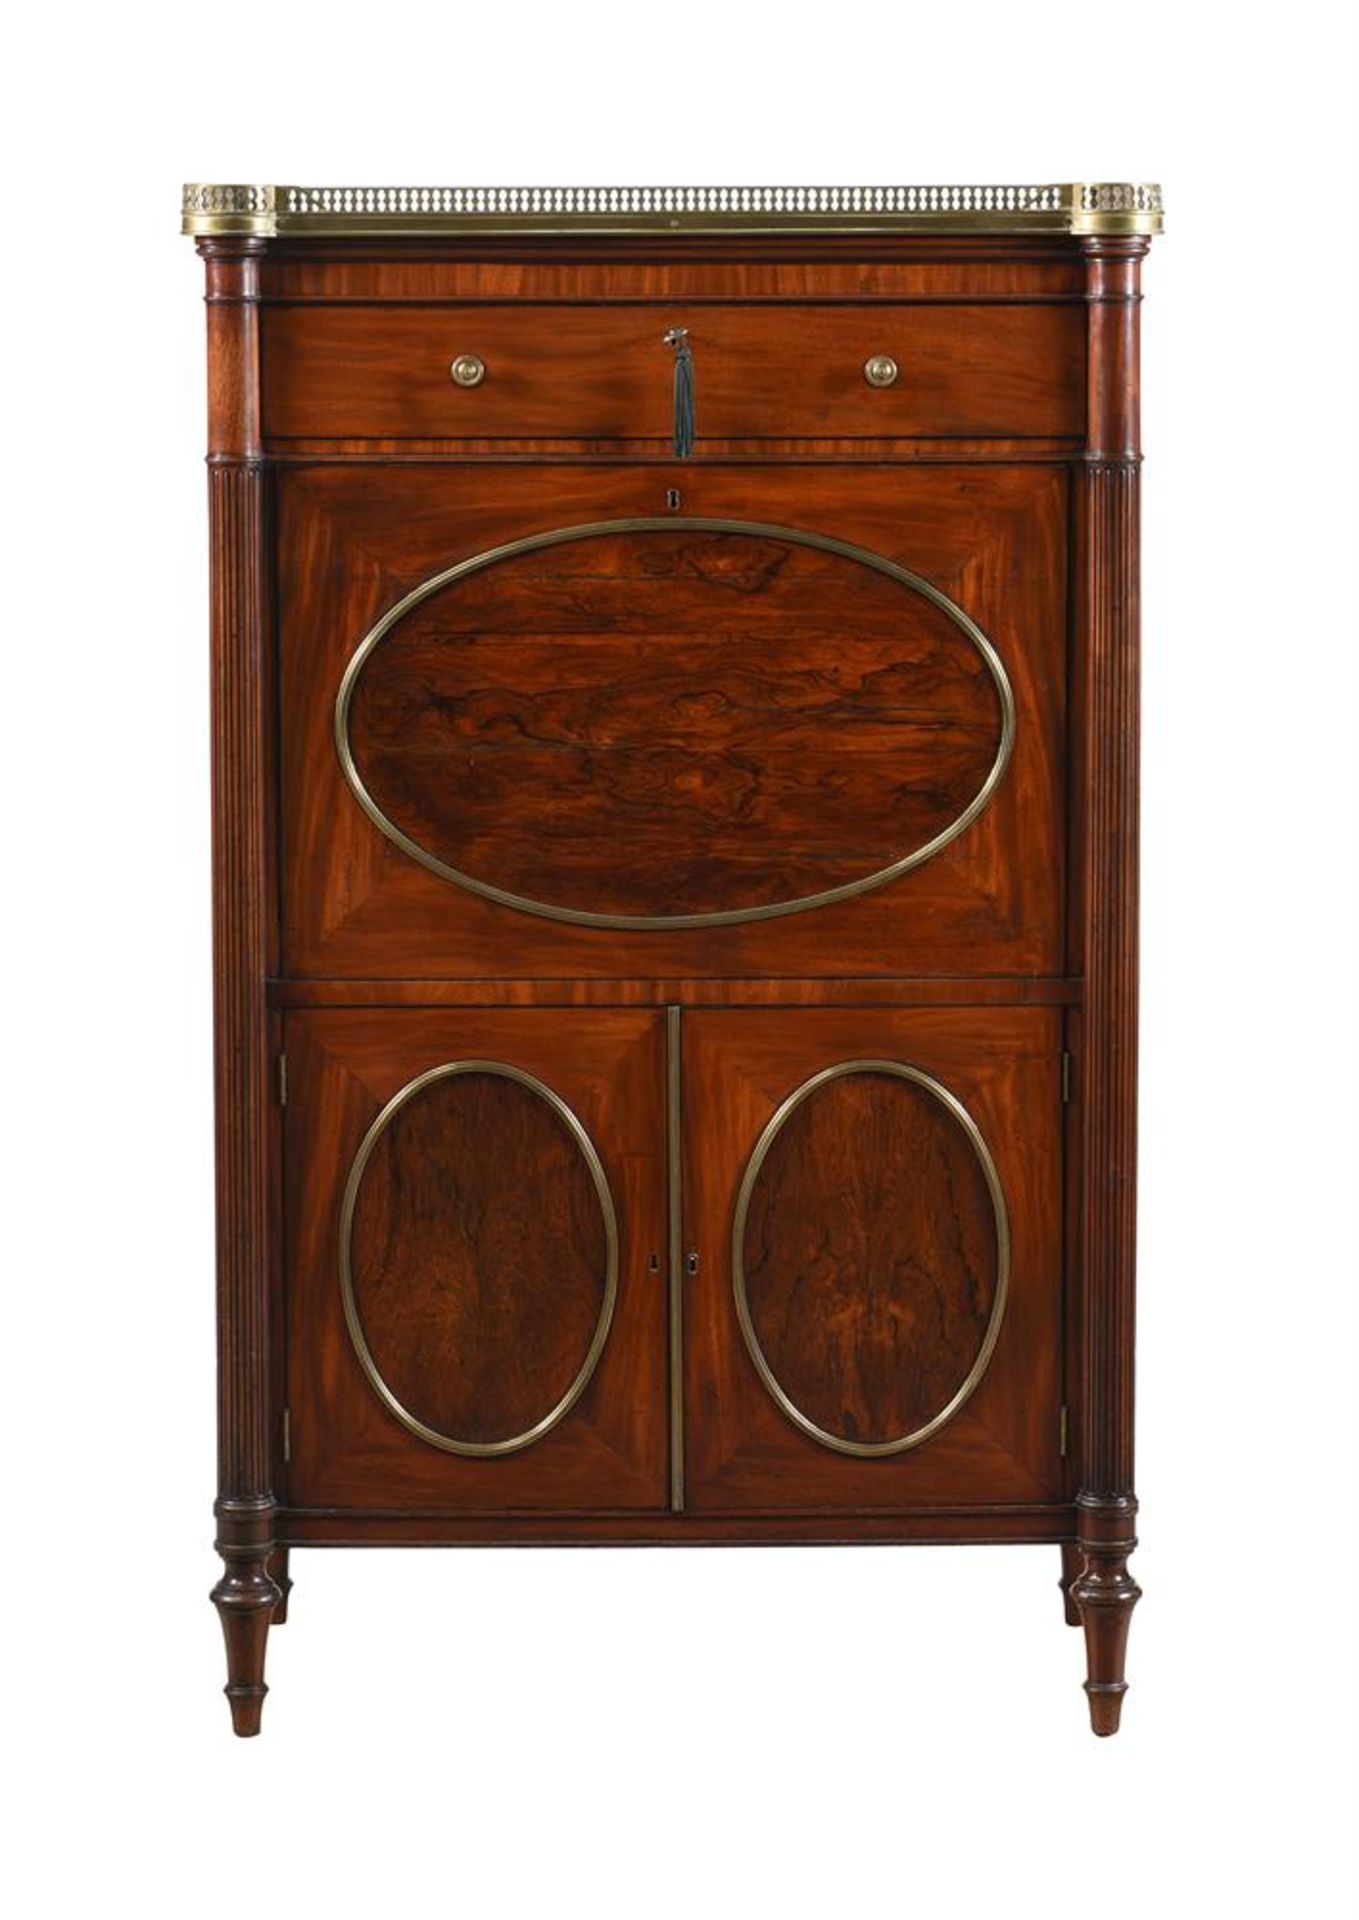 Y A MAHOGANY AND ROSEWOOD SECRETAIRE IN FRENCH TASTE, 19TH CENTURY